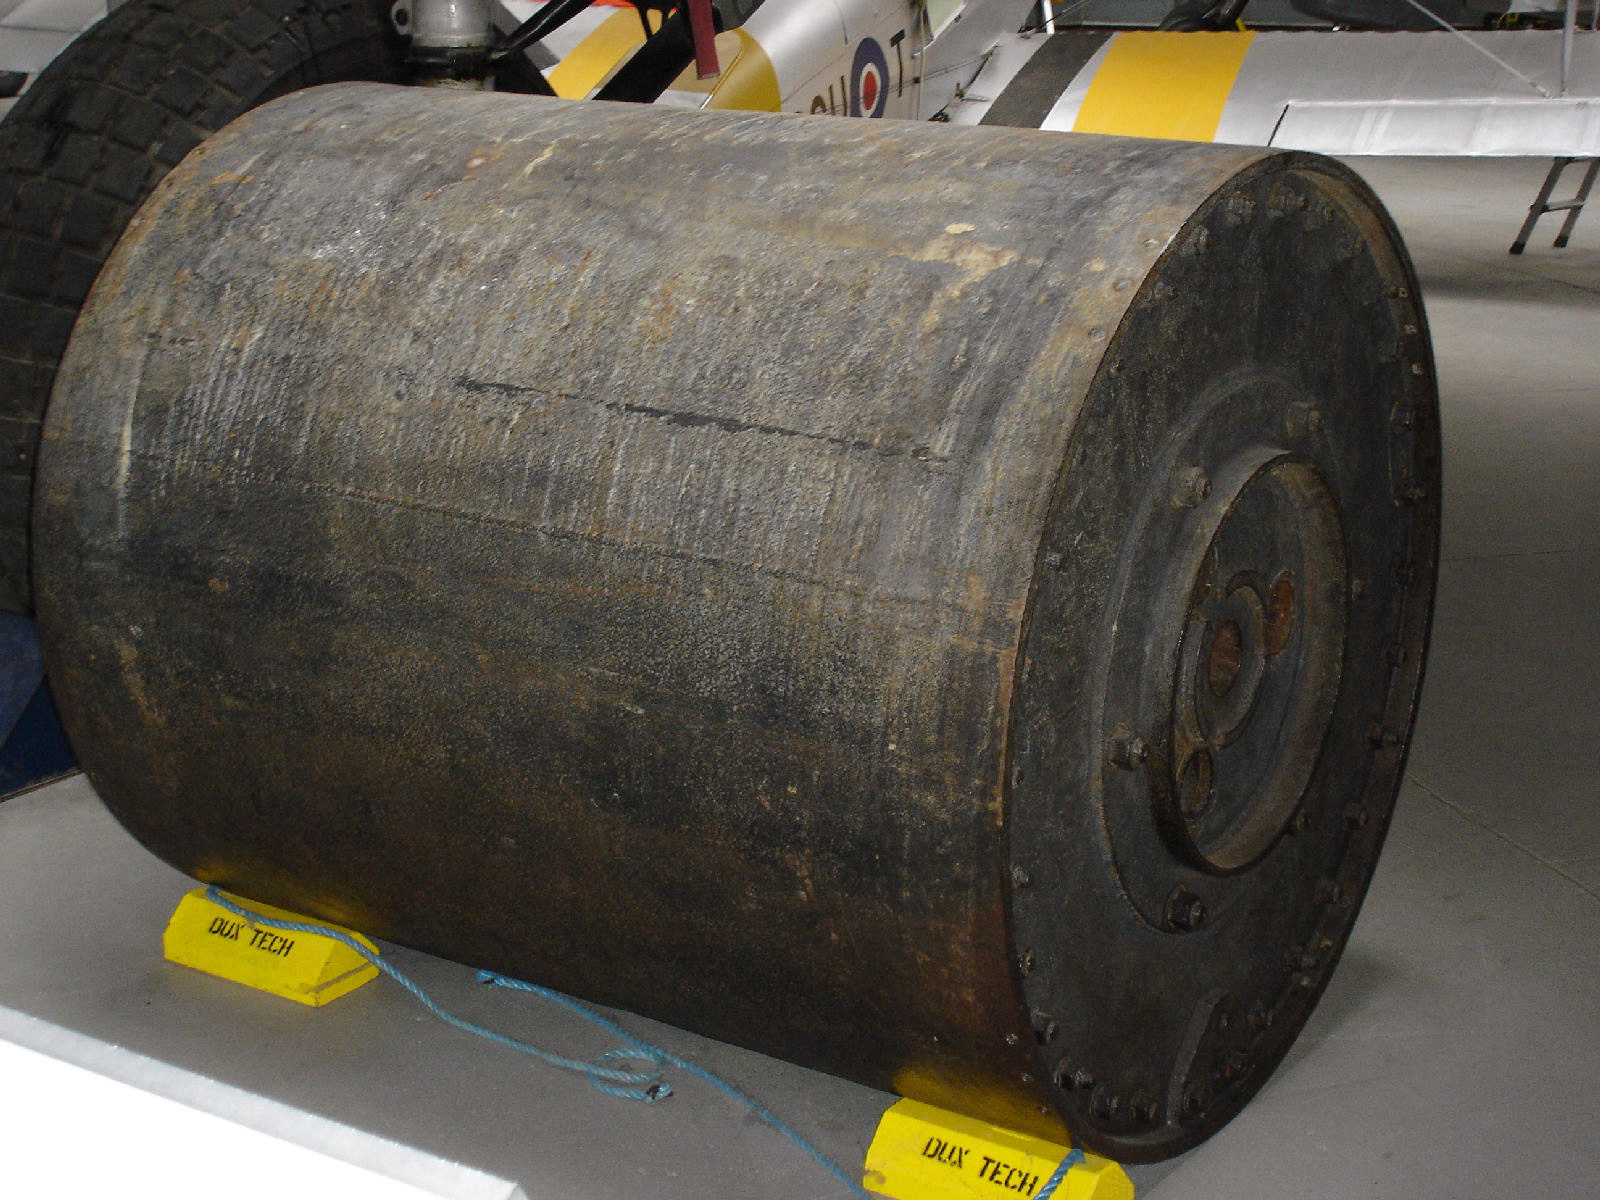 A disarmed 'bouncing bomb' on display at the Duxford Imperial War Museum,Cambridgeshire, England, United Kingdom, Feb 2005